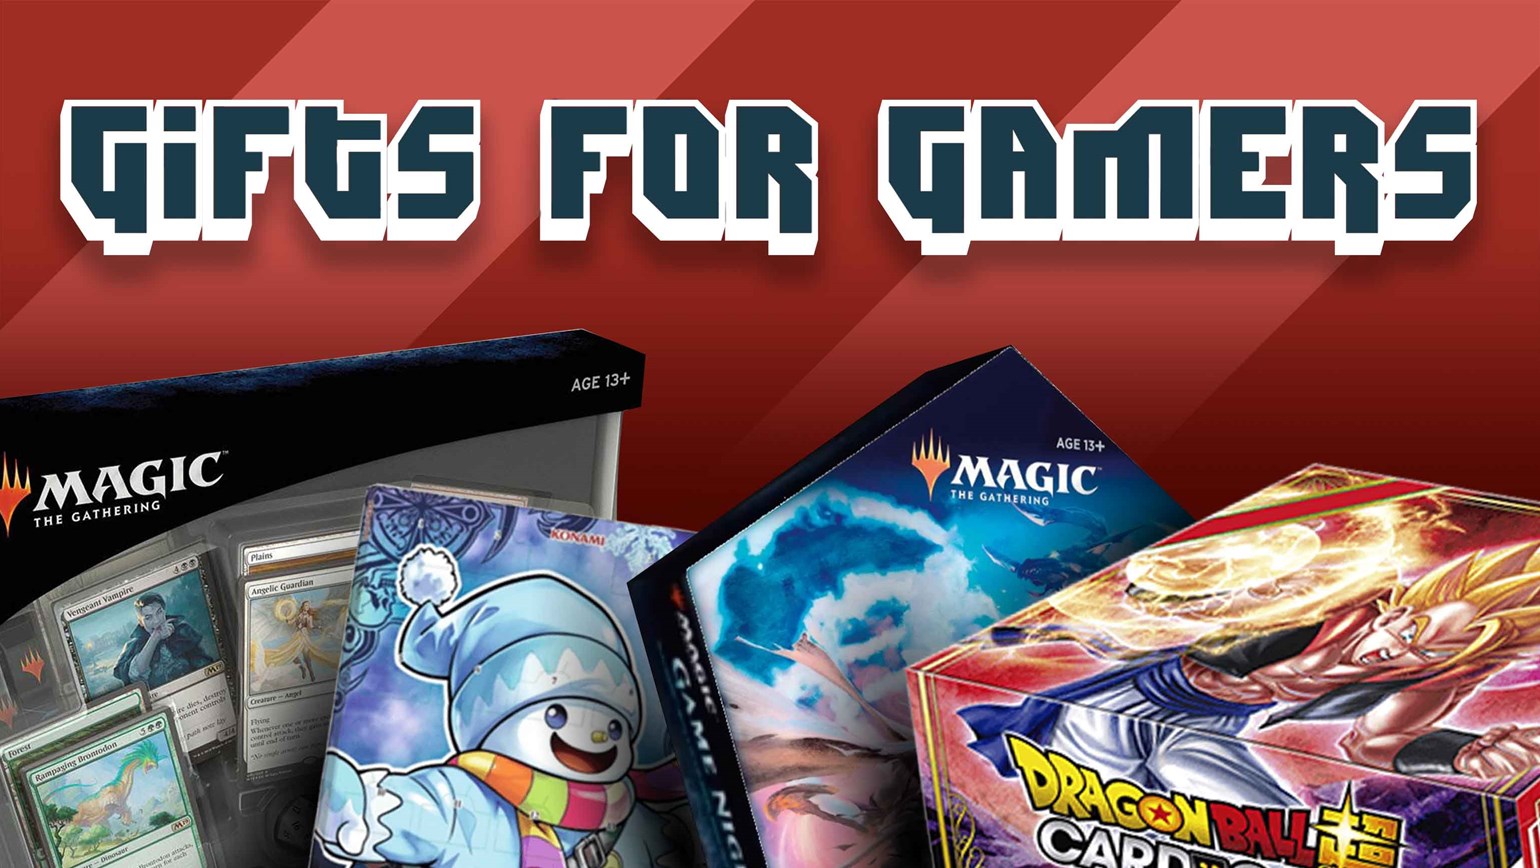 Great Gifts for Gamers Now Available to List on TCGplayer.com